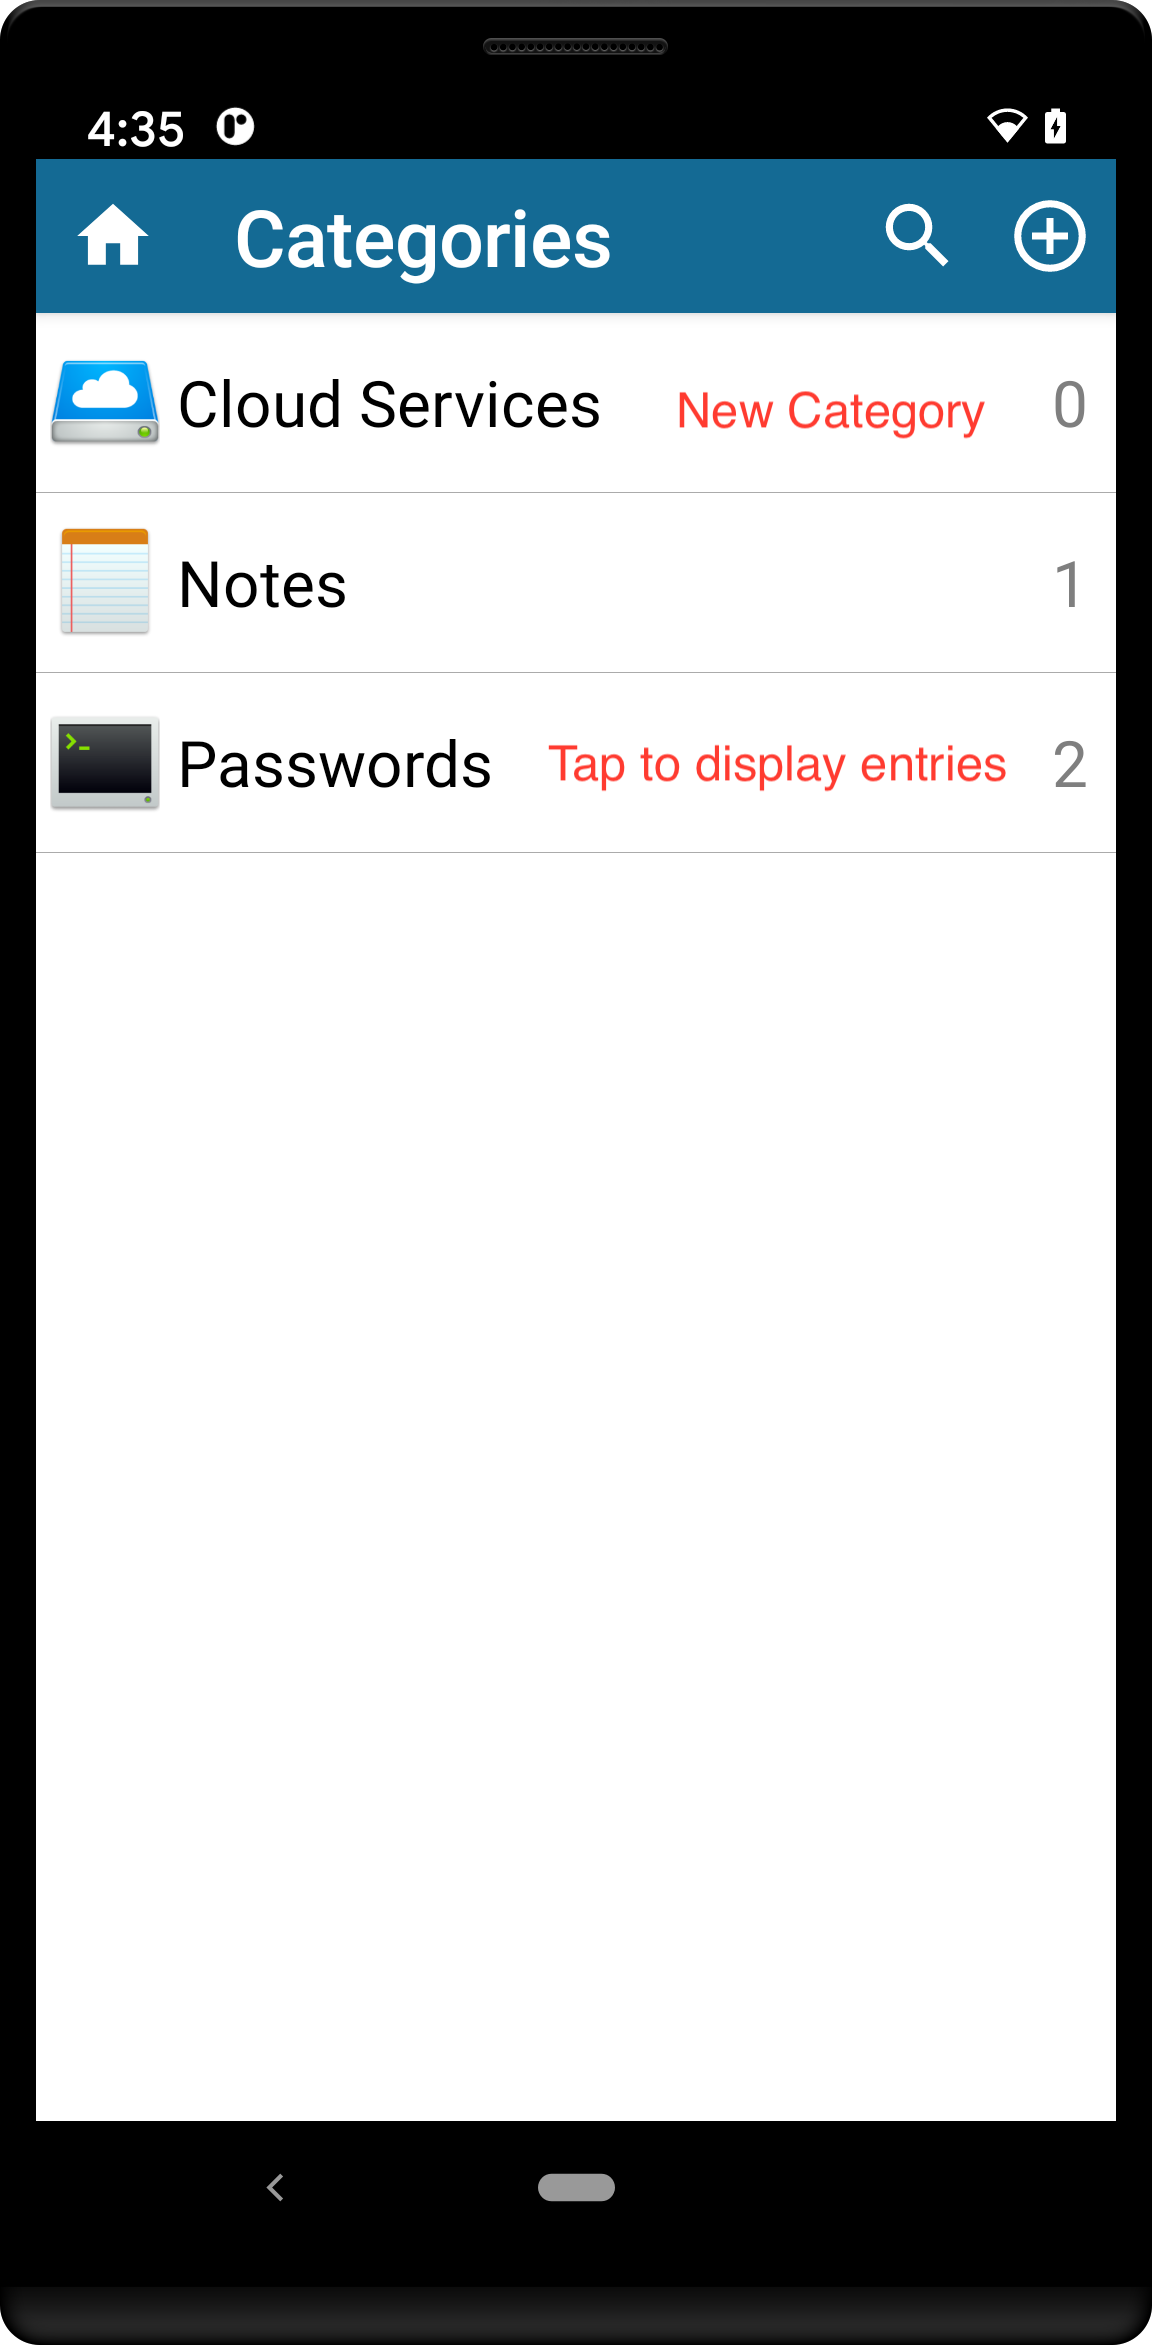 Categories view with the Passwords Category highlighted